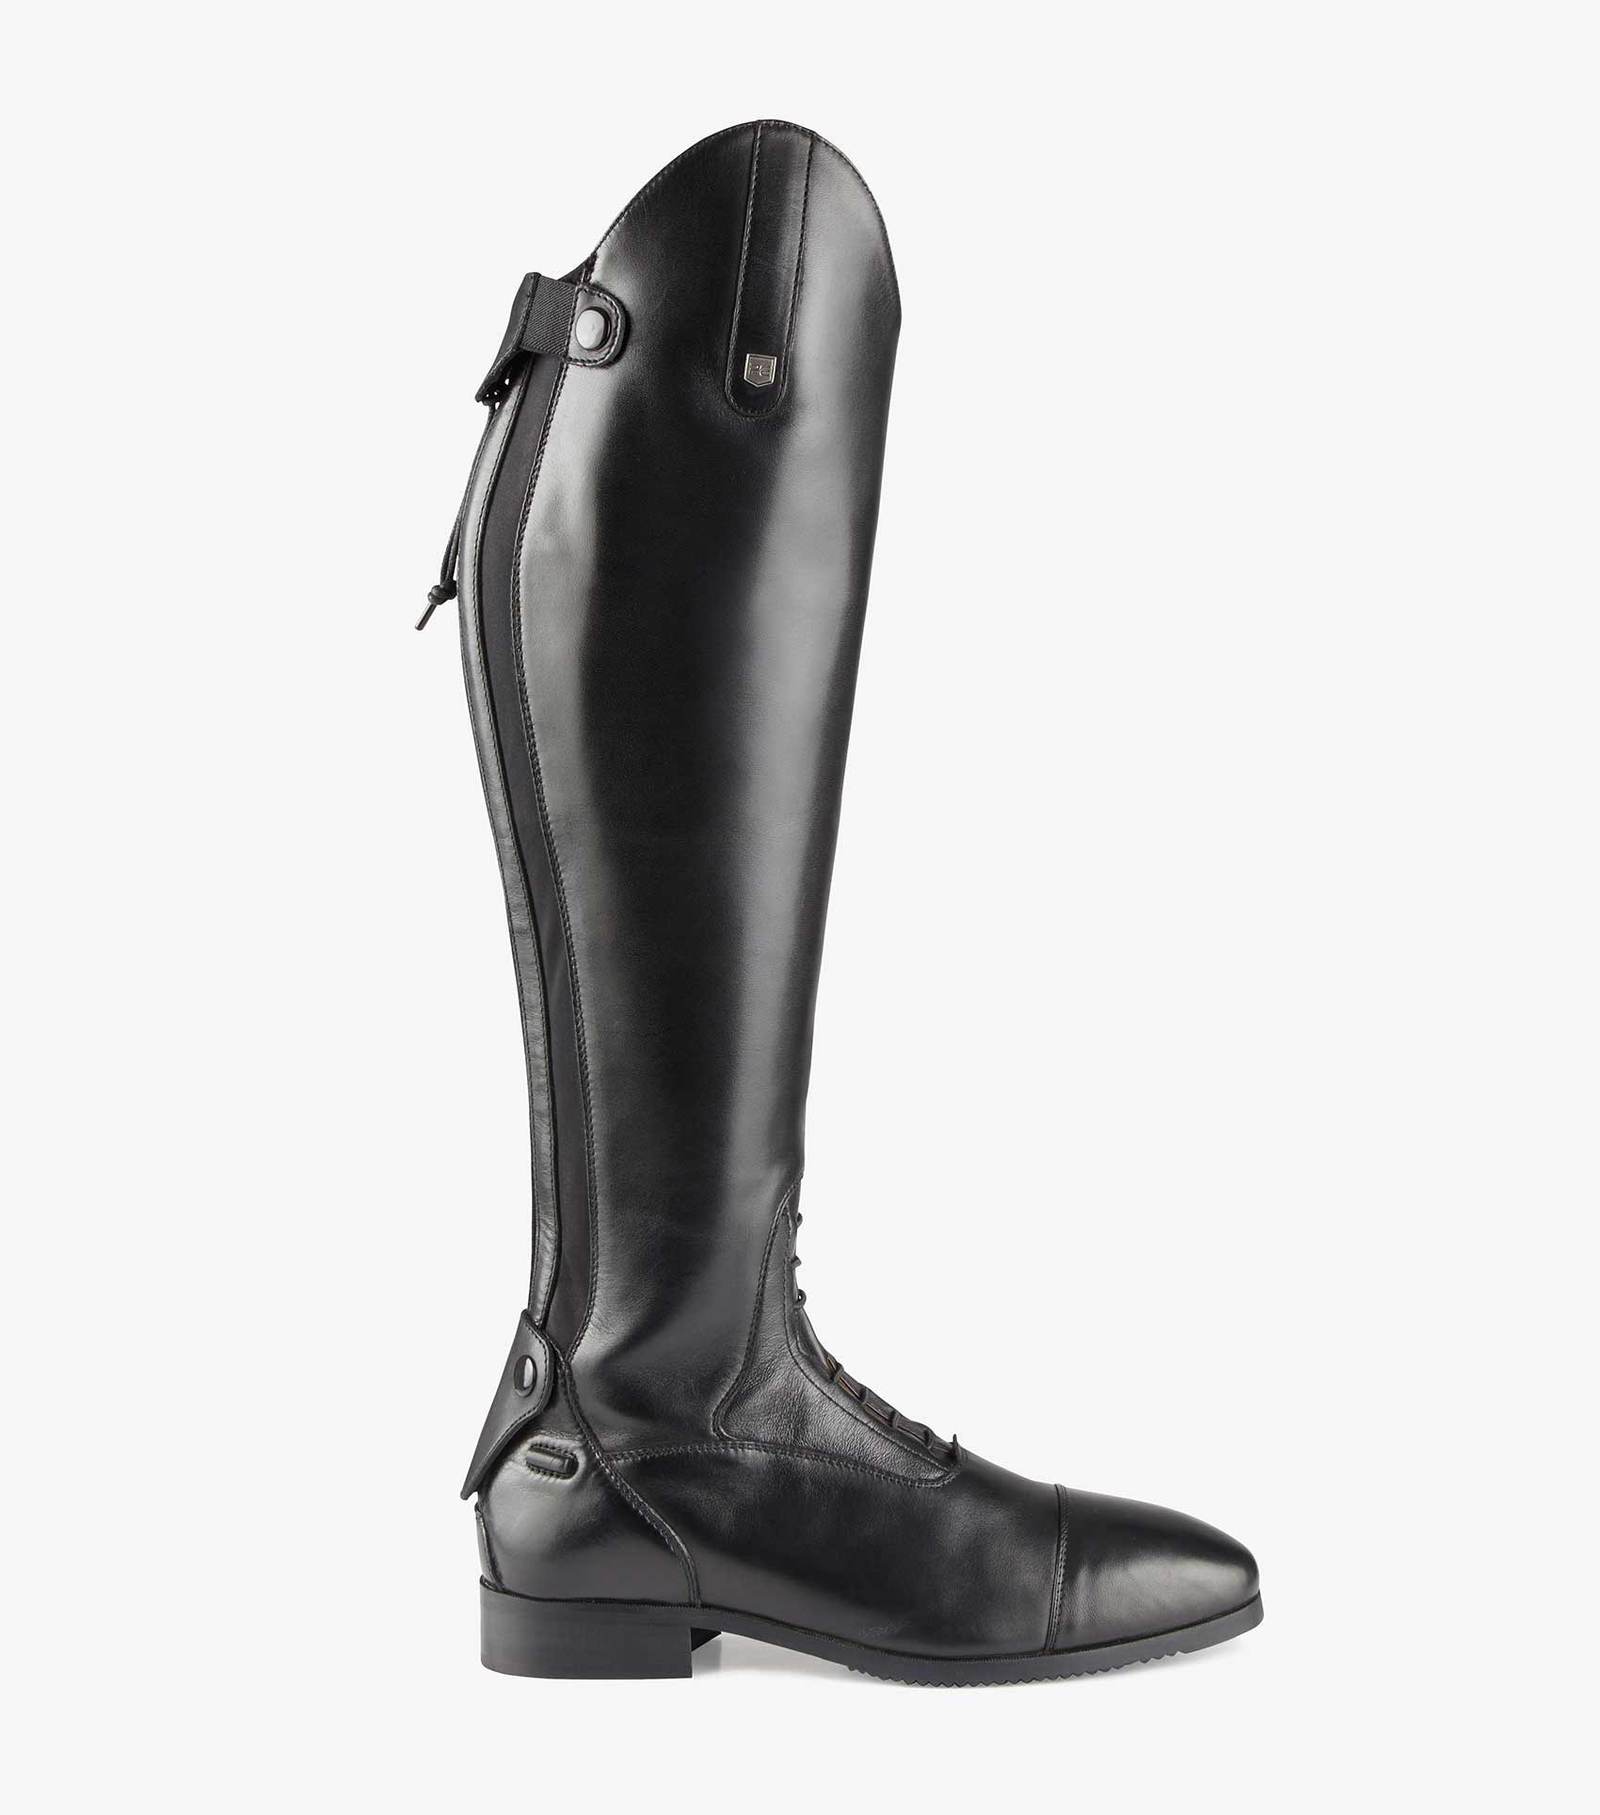 PE - Galileo Men's Long Leather Field Riding Boots